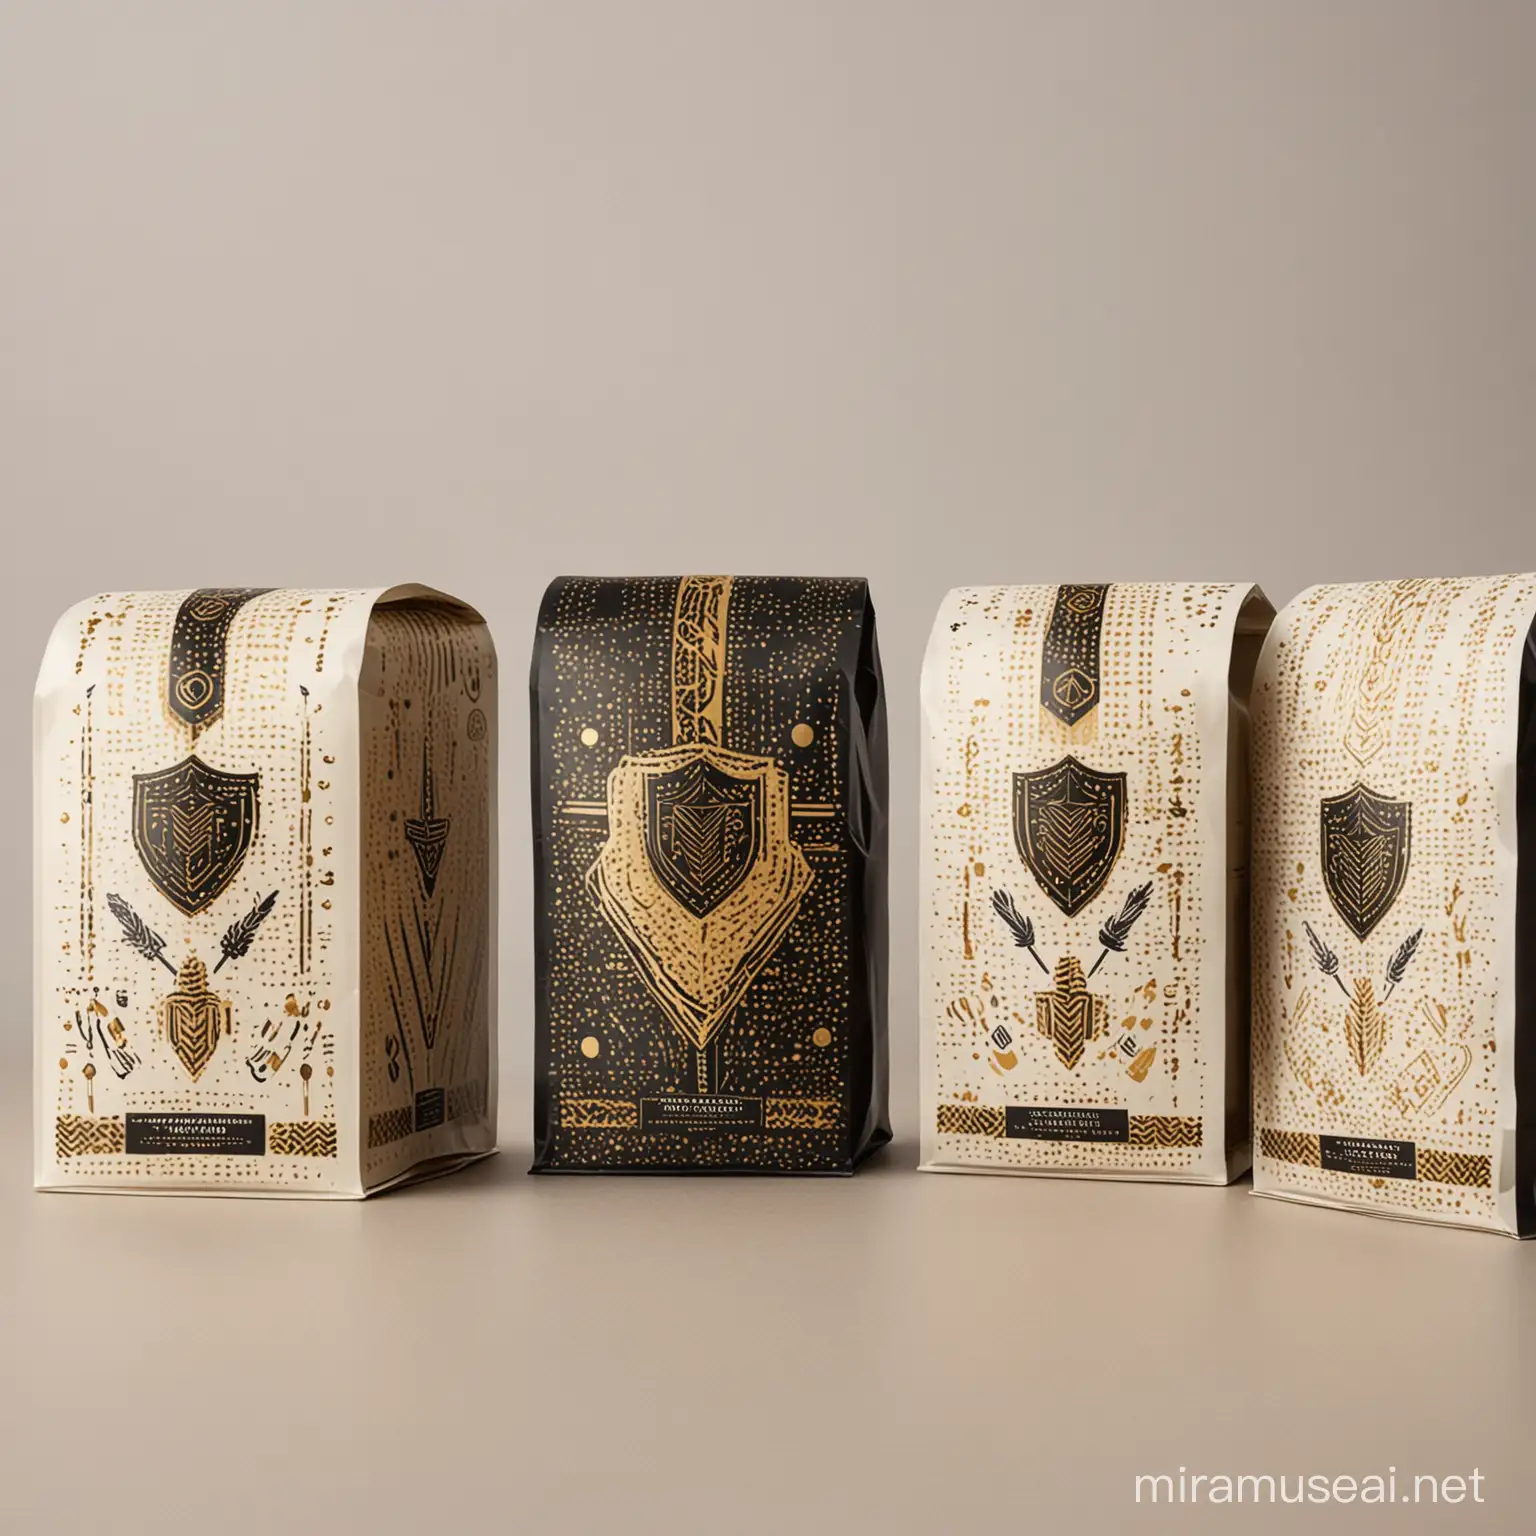 design me coffee packaging in black and gold with african print consisting of shields, arrows, lines and dots in an off white colour